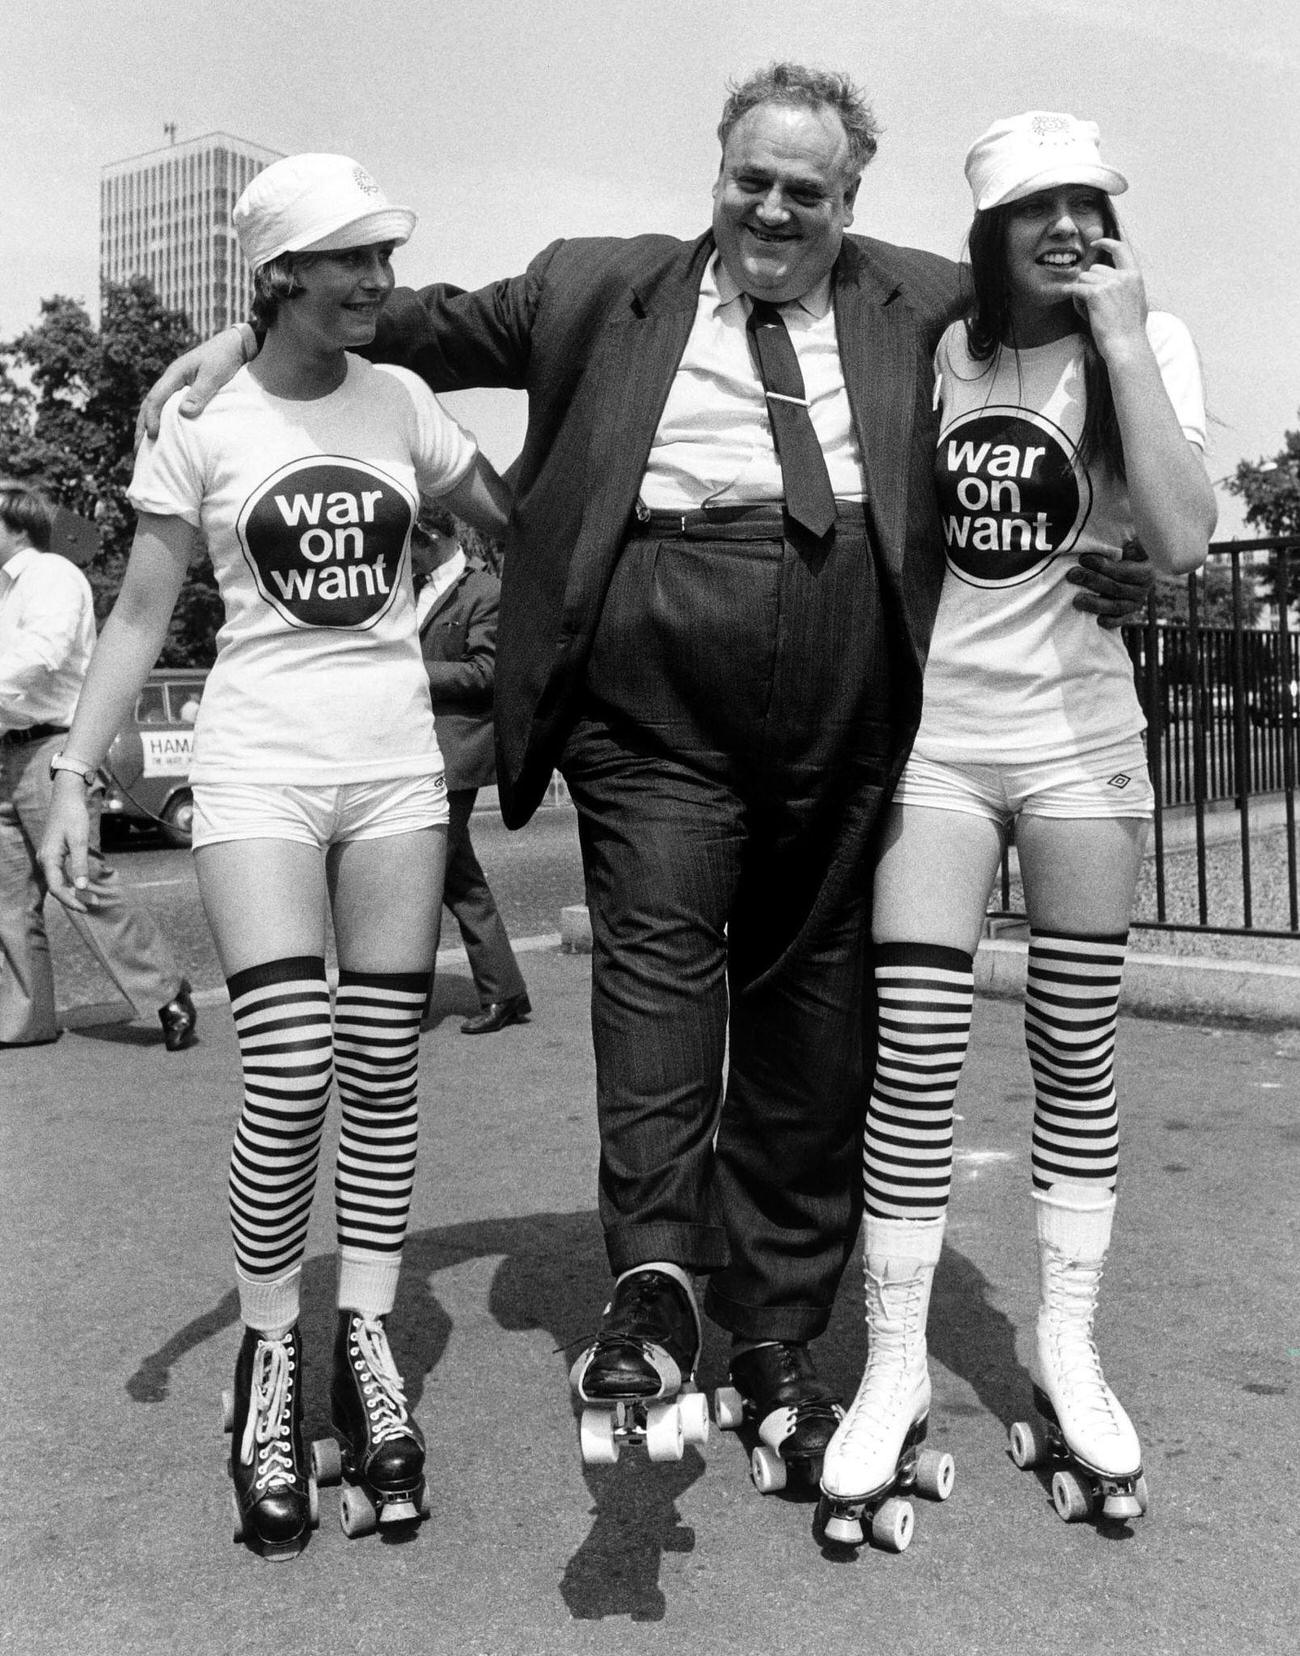 Cyril Smith Roller Skating to Publicize Charity "War on Want," London, 1978